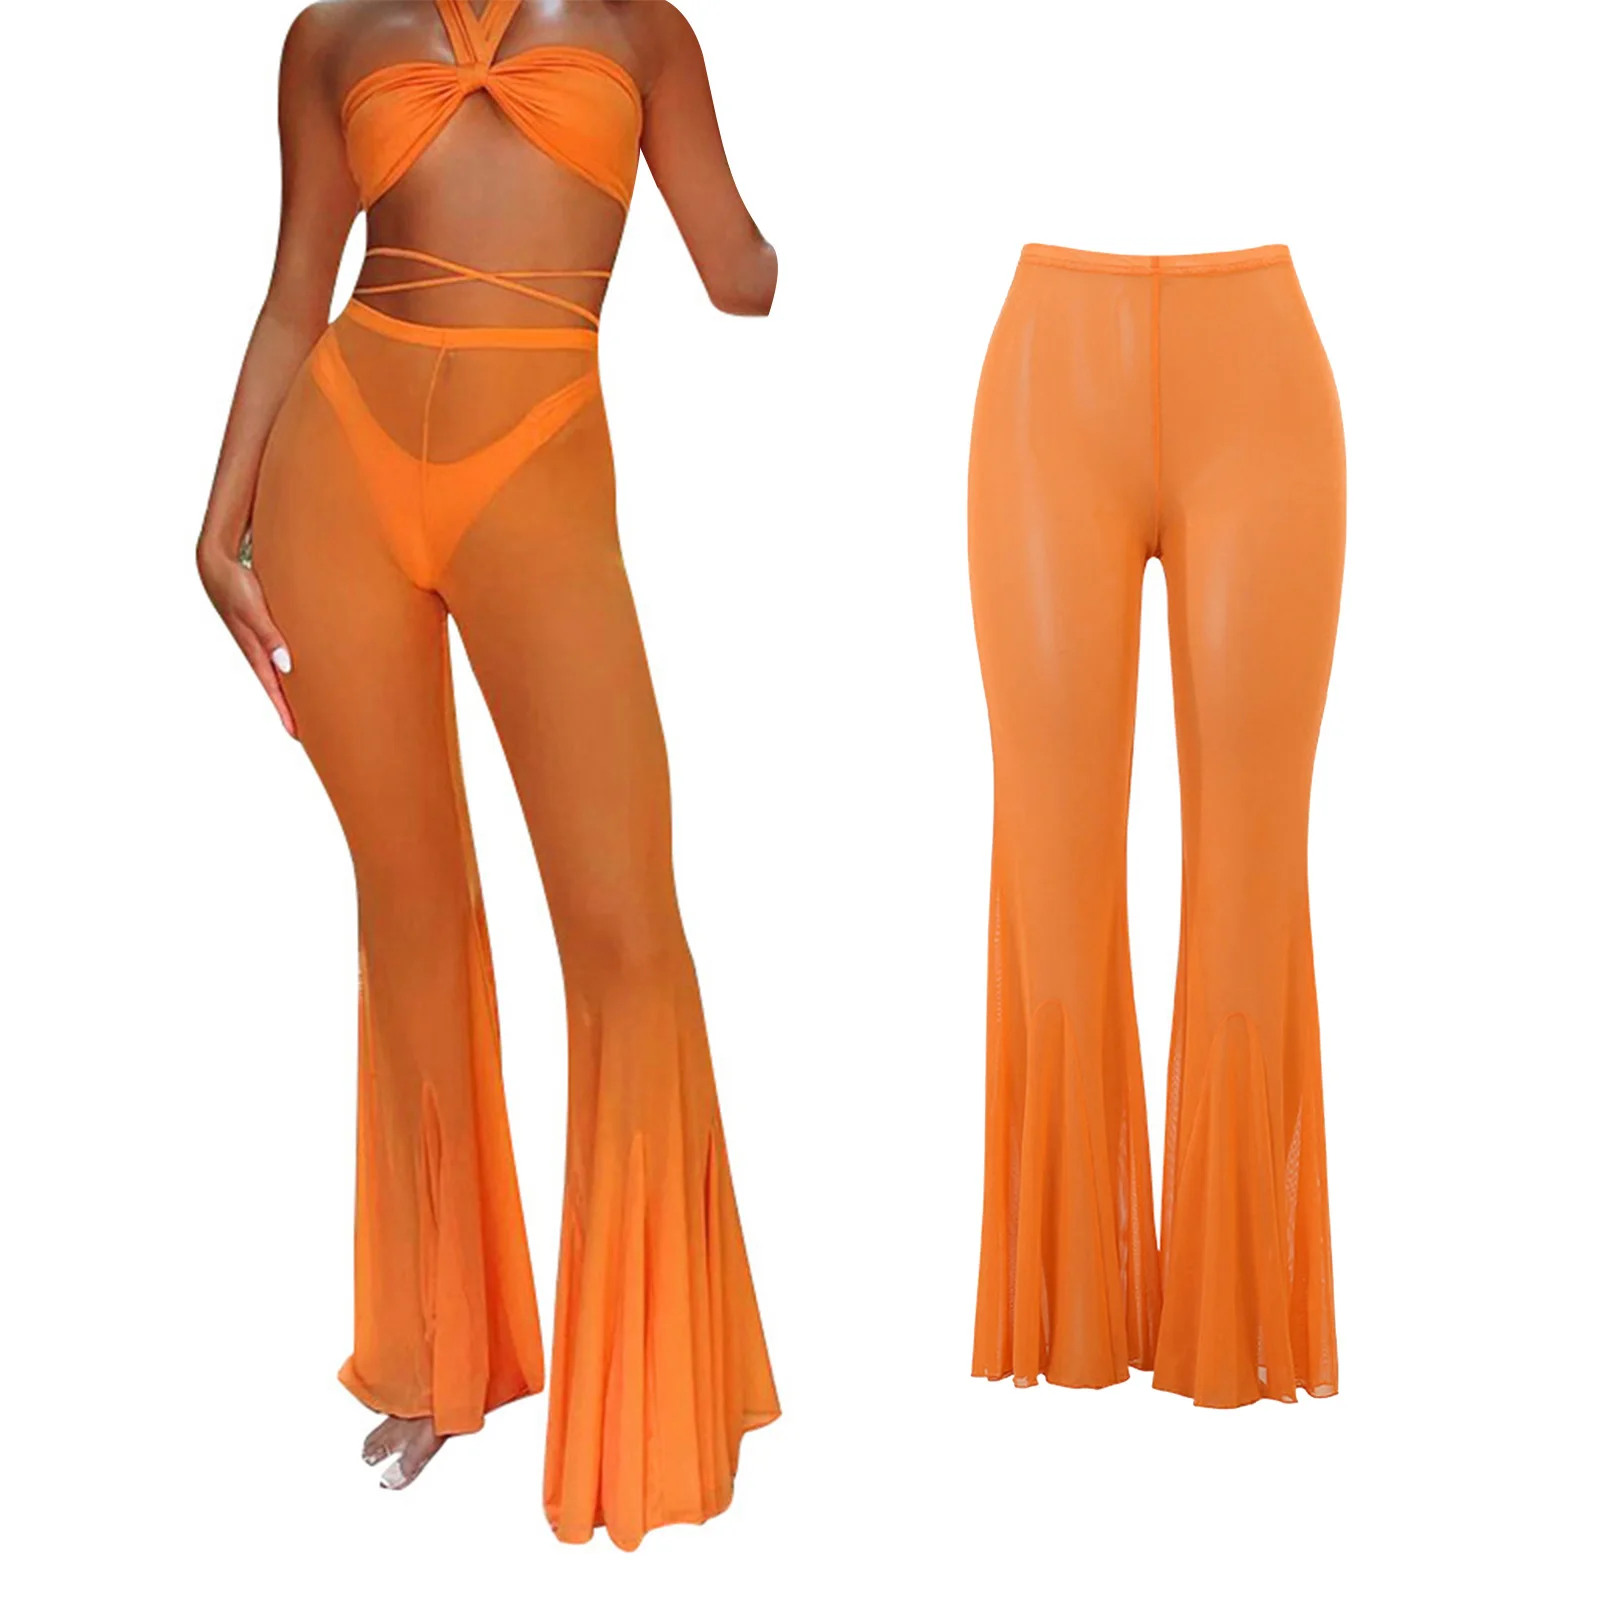 

2021 New Fashion Women Summer Flared Trousers,Solid Color Sheer Elastic High-Waist Bell-Bottomed Pants for Girls, Orange